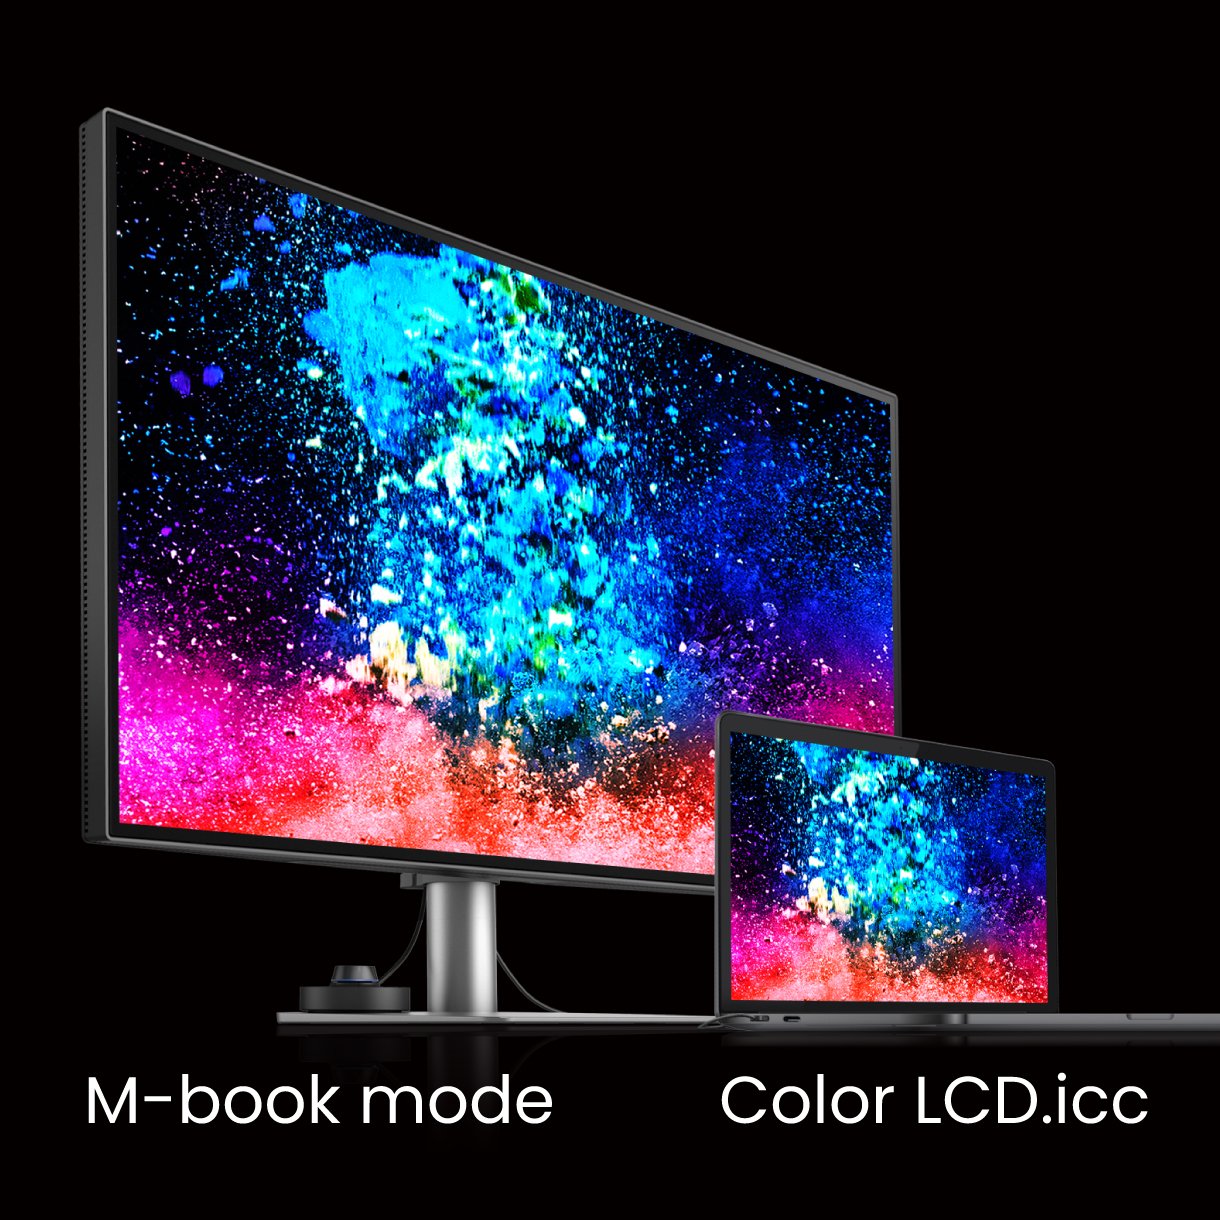 BenQ PD models ship from the factory with default color settings that perfectly match Mac® and MacBook® Pro laptop colors and BenQ exclusive M-Book mode on the PD3220U provides active color syncing between Macs and the monitor while you work.